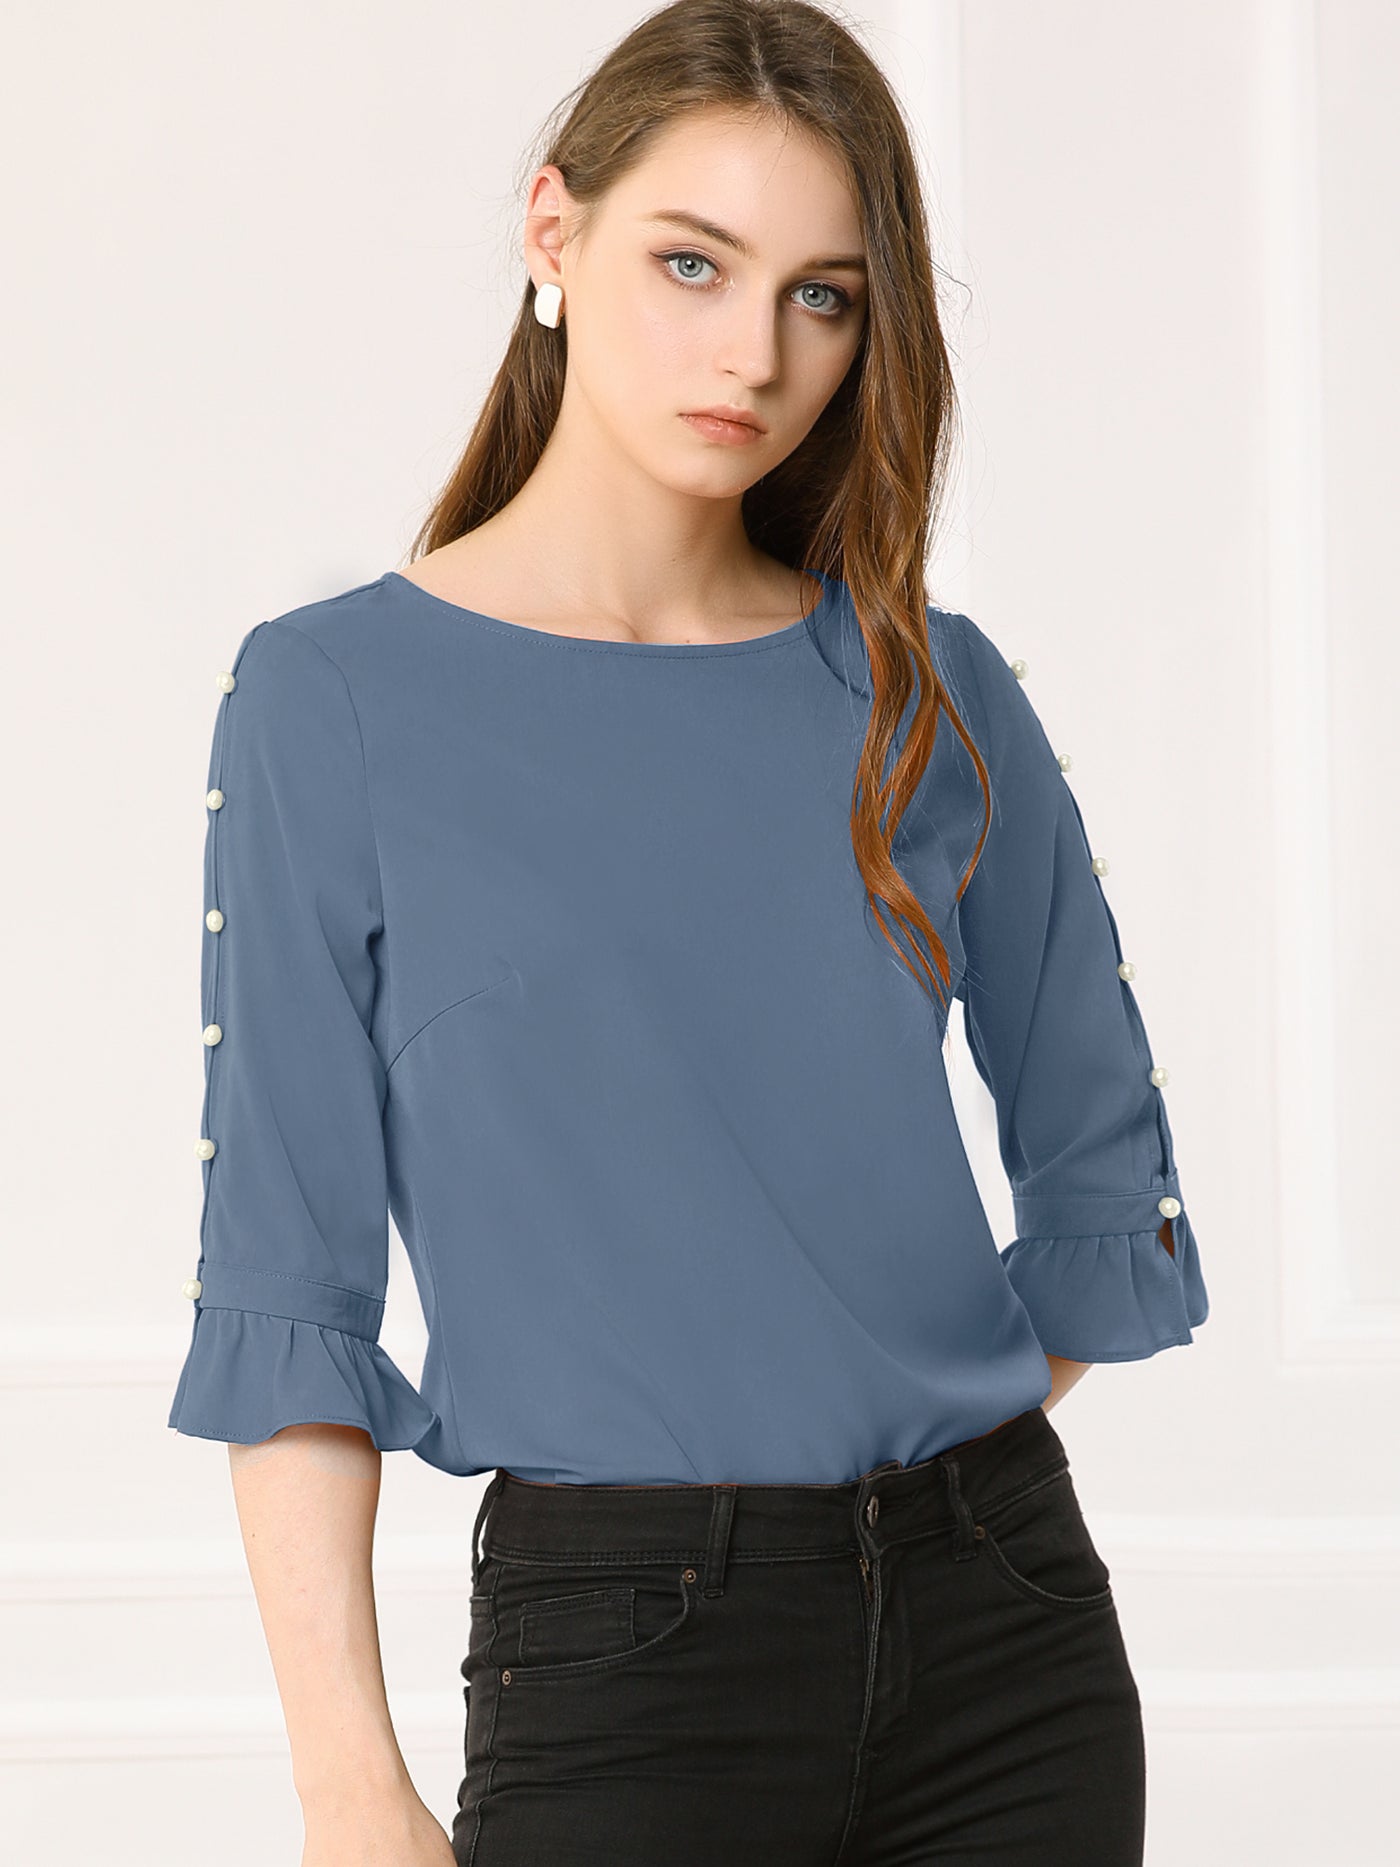 Allegra K Ruffle Half Sleeve Keyhole Casual Tops Button Solid Blouse Top